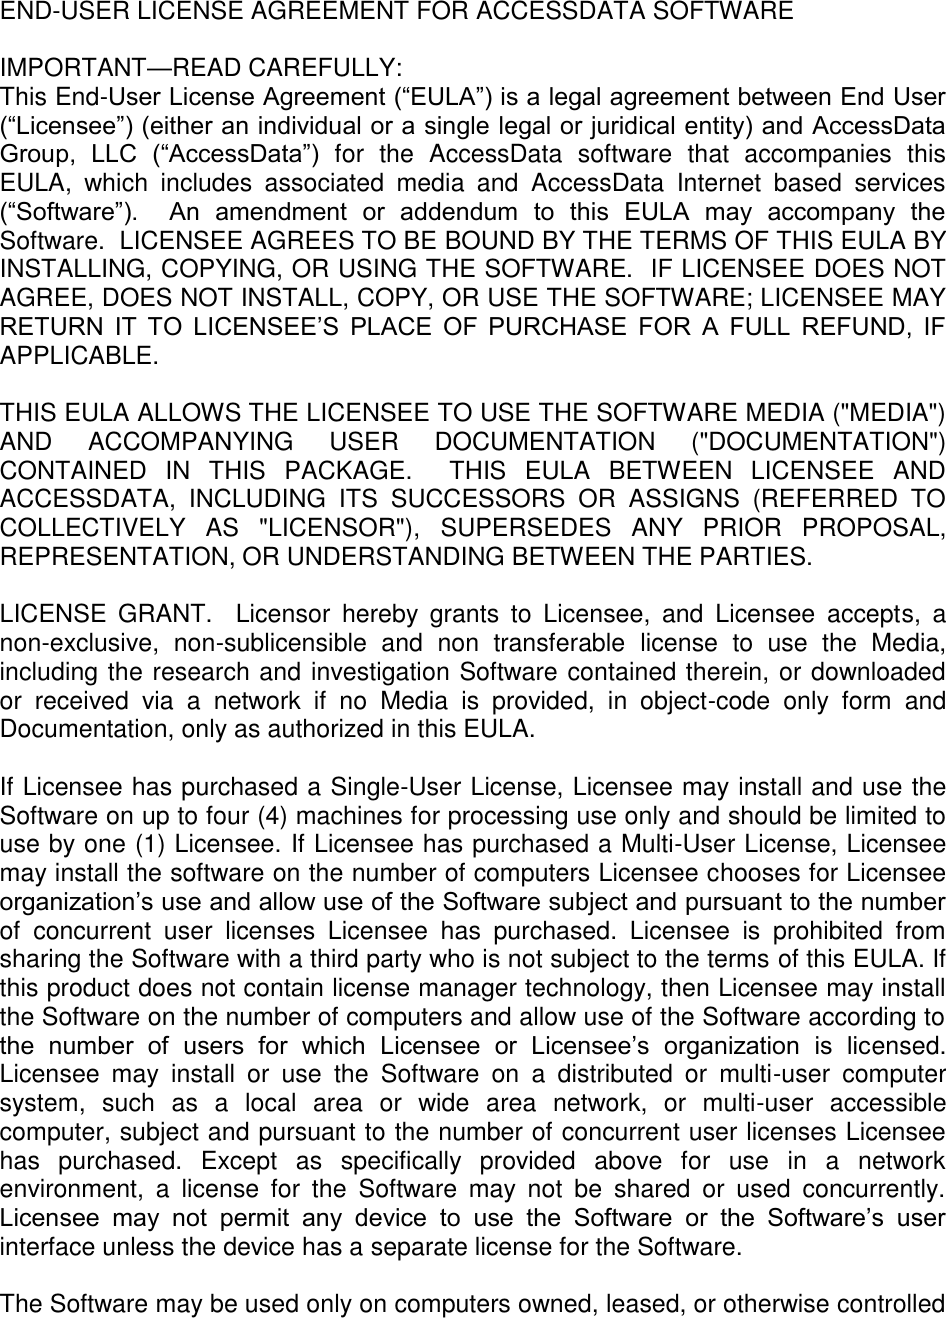 Page 1 of 7 - End User Agreement